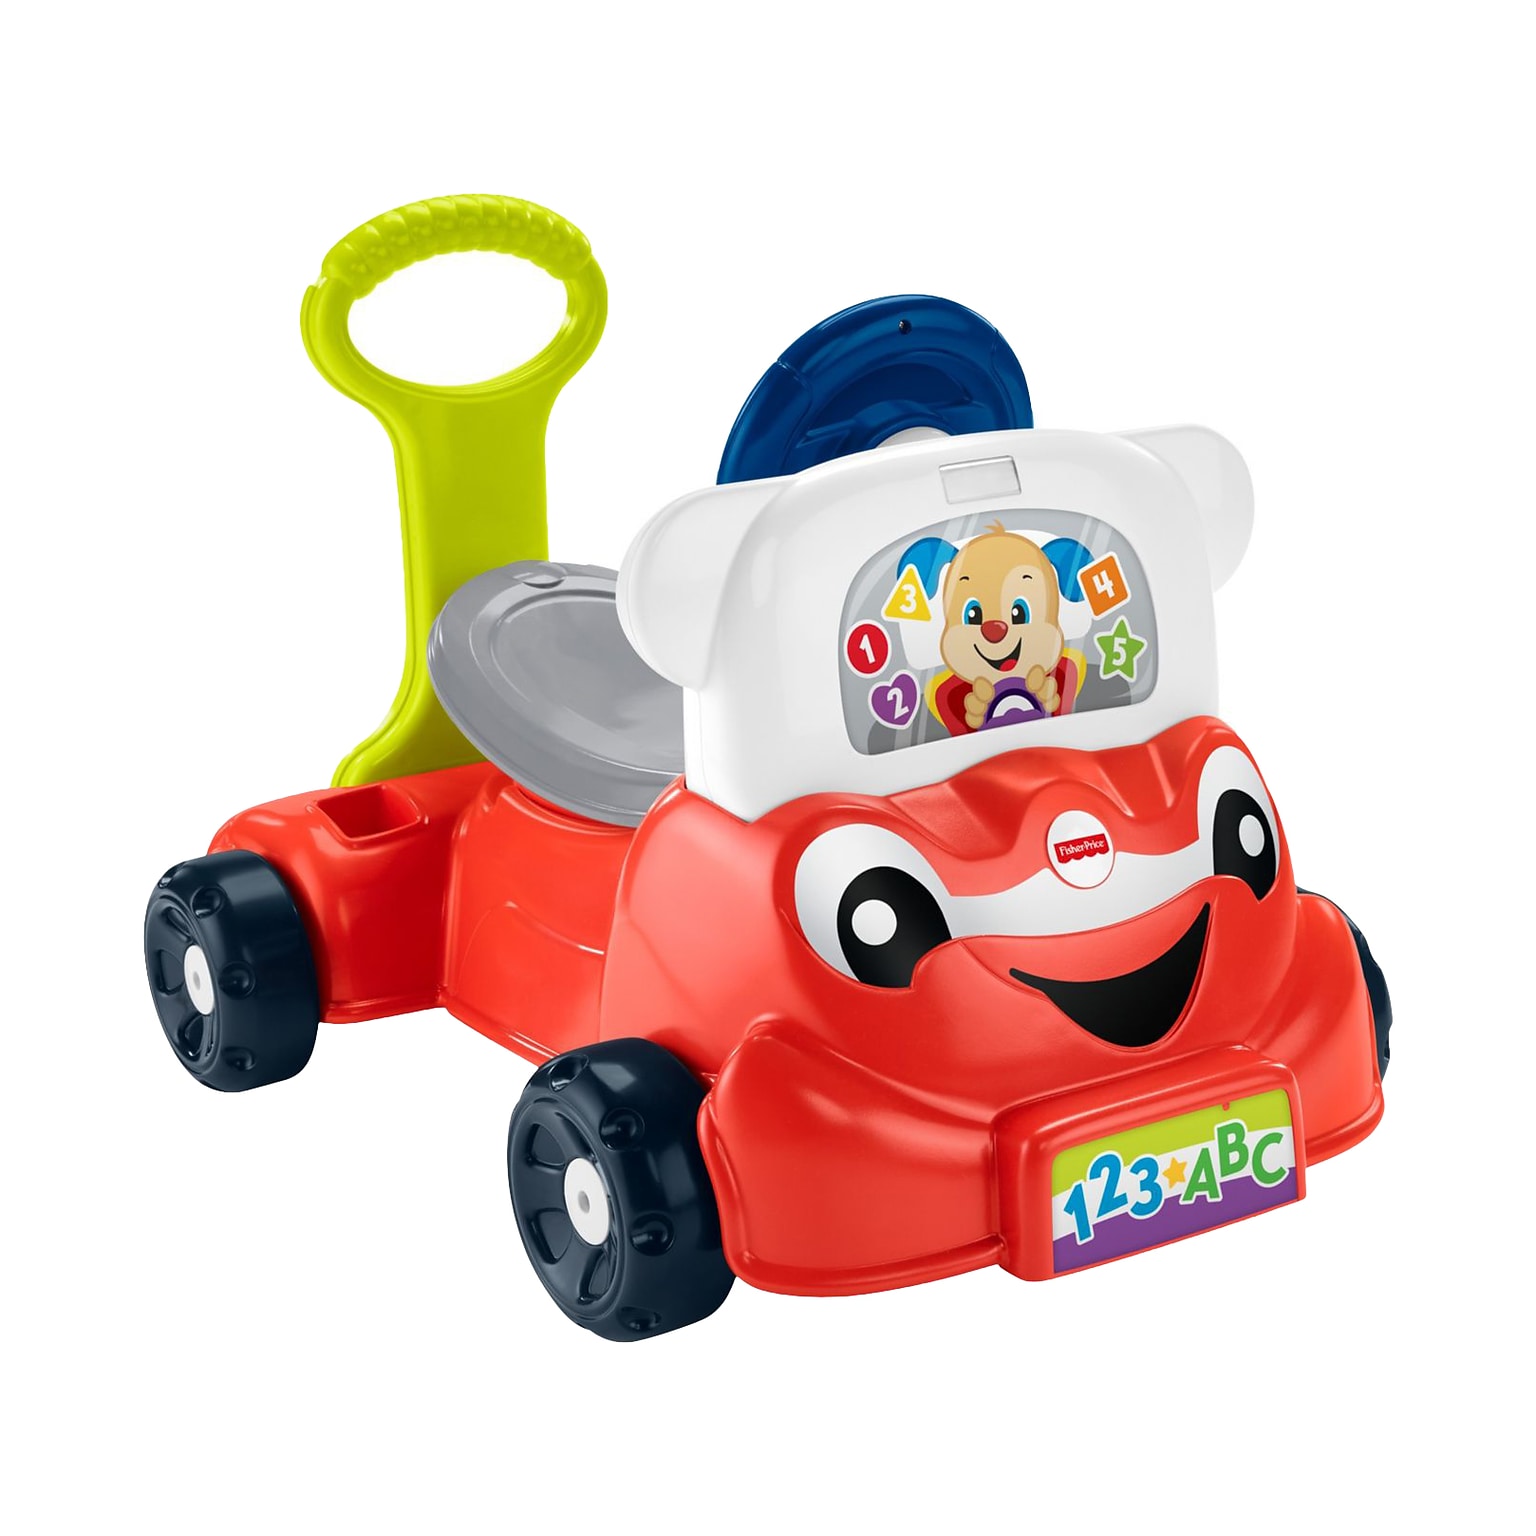 Fisher-Price Laugh and Learn 3-in-1 Smart Car, Multicolored (FNT03)